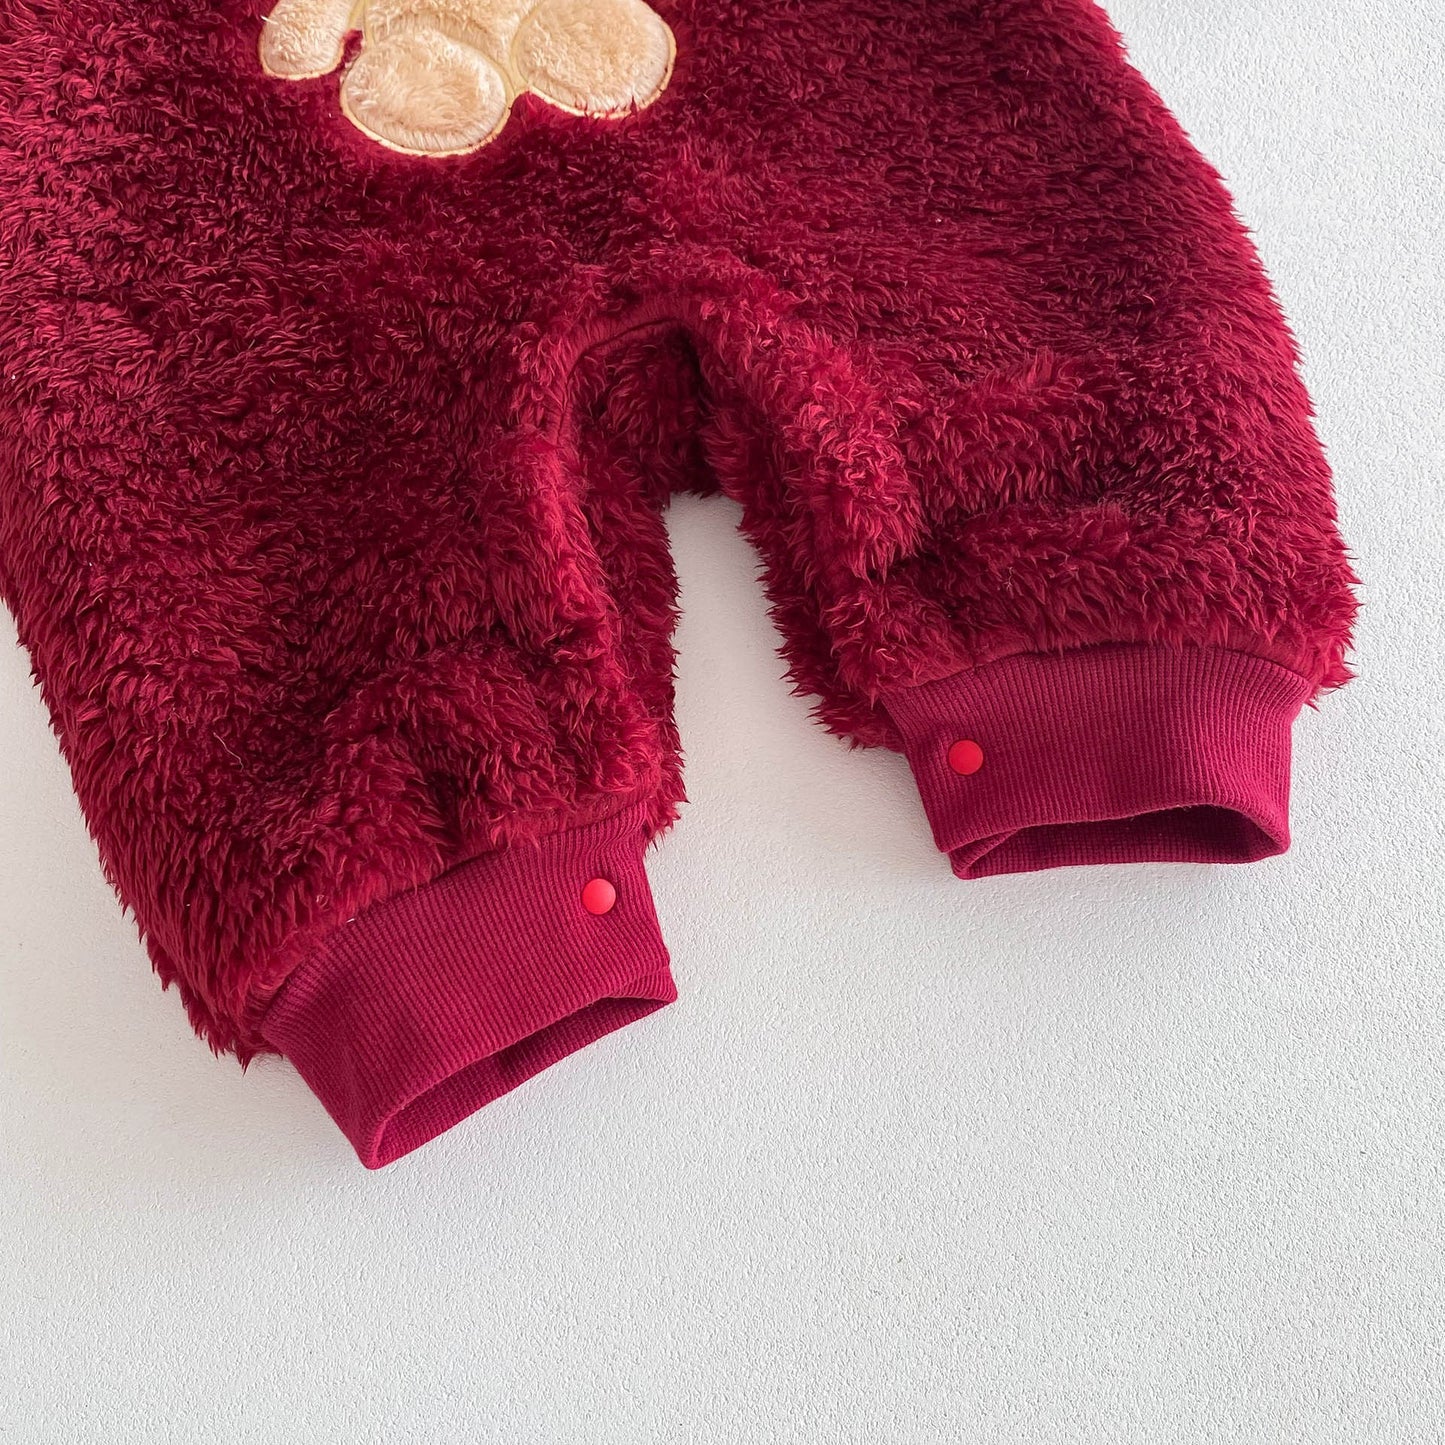 Cute And Cozy Baby Teddy Bear Romper For Autumn/Winter Outings – Red Infant Jumpsuit With Added Warmth, Perfect For Baby Clothing